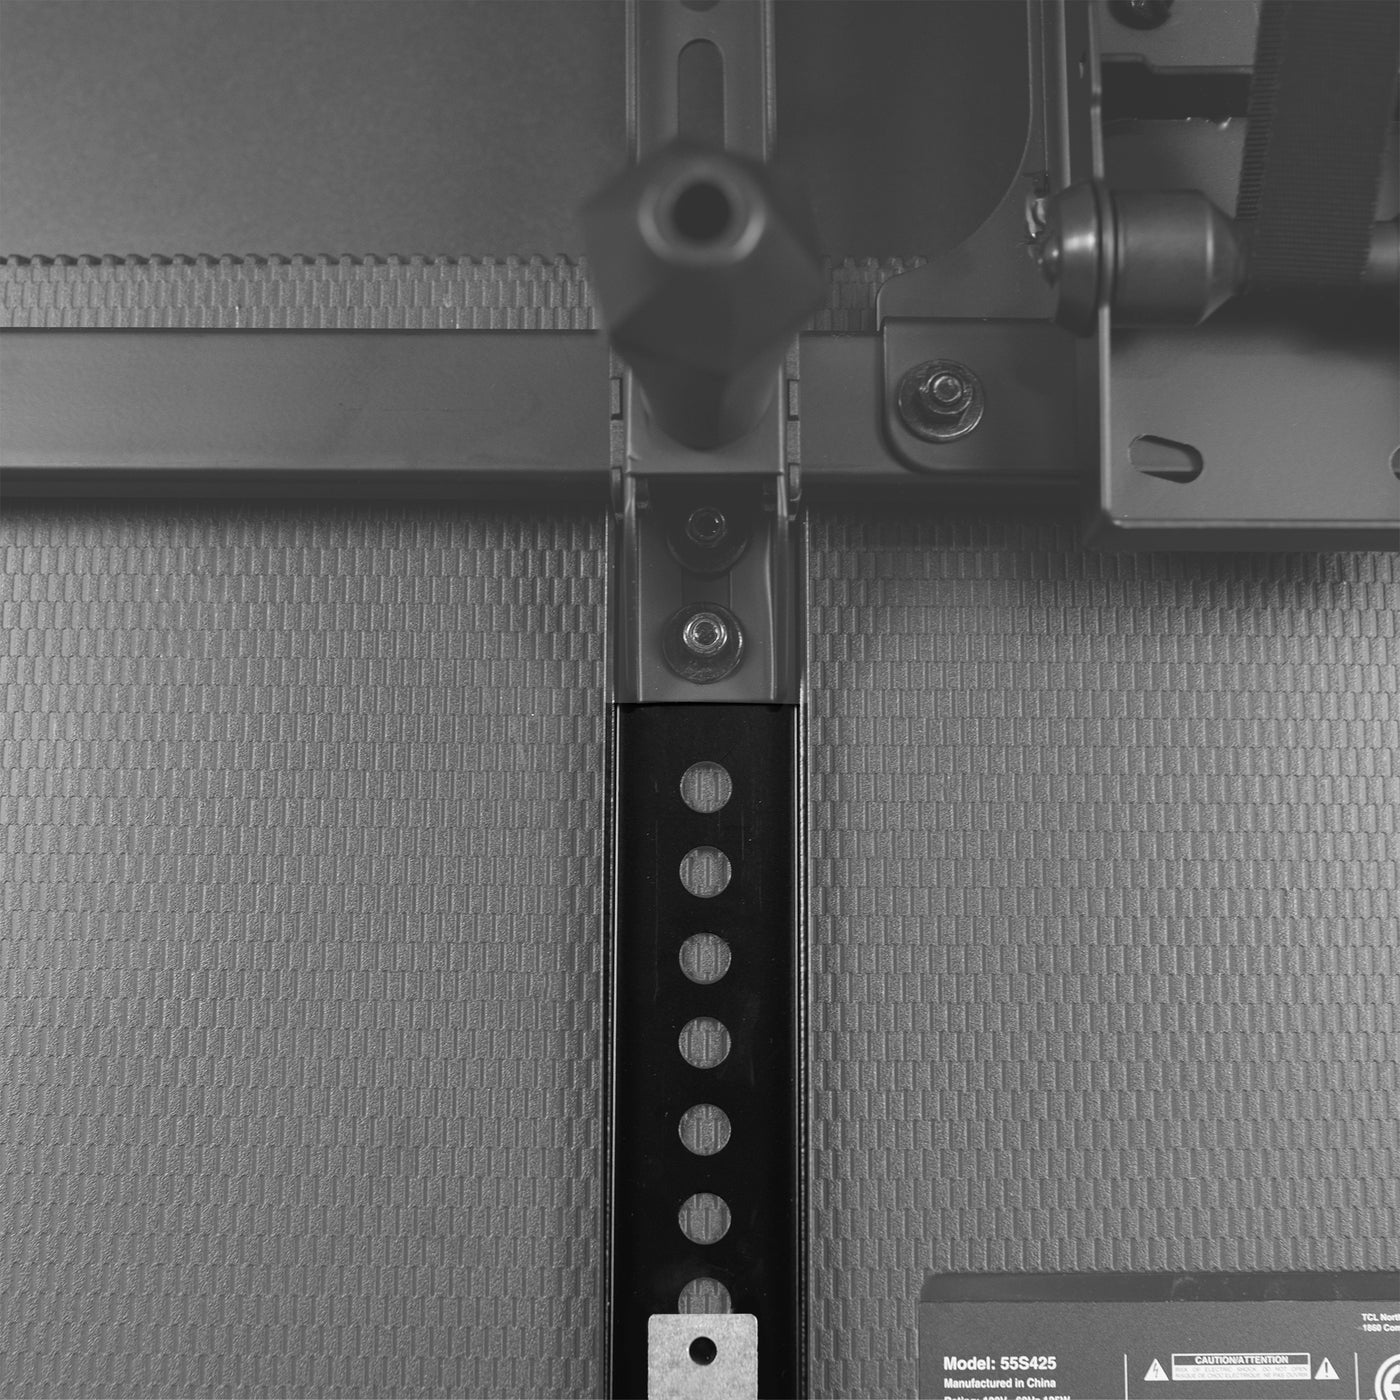 Close up of Vertical extension bracket for the back of a mounted TV.